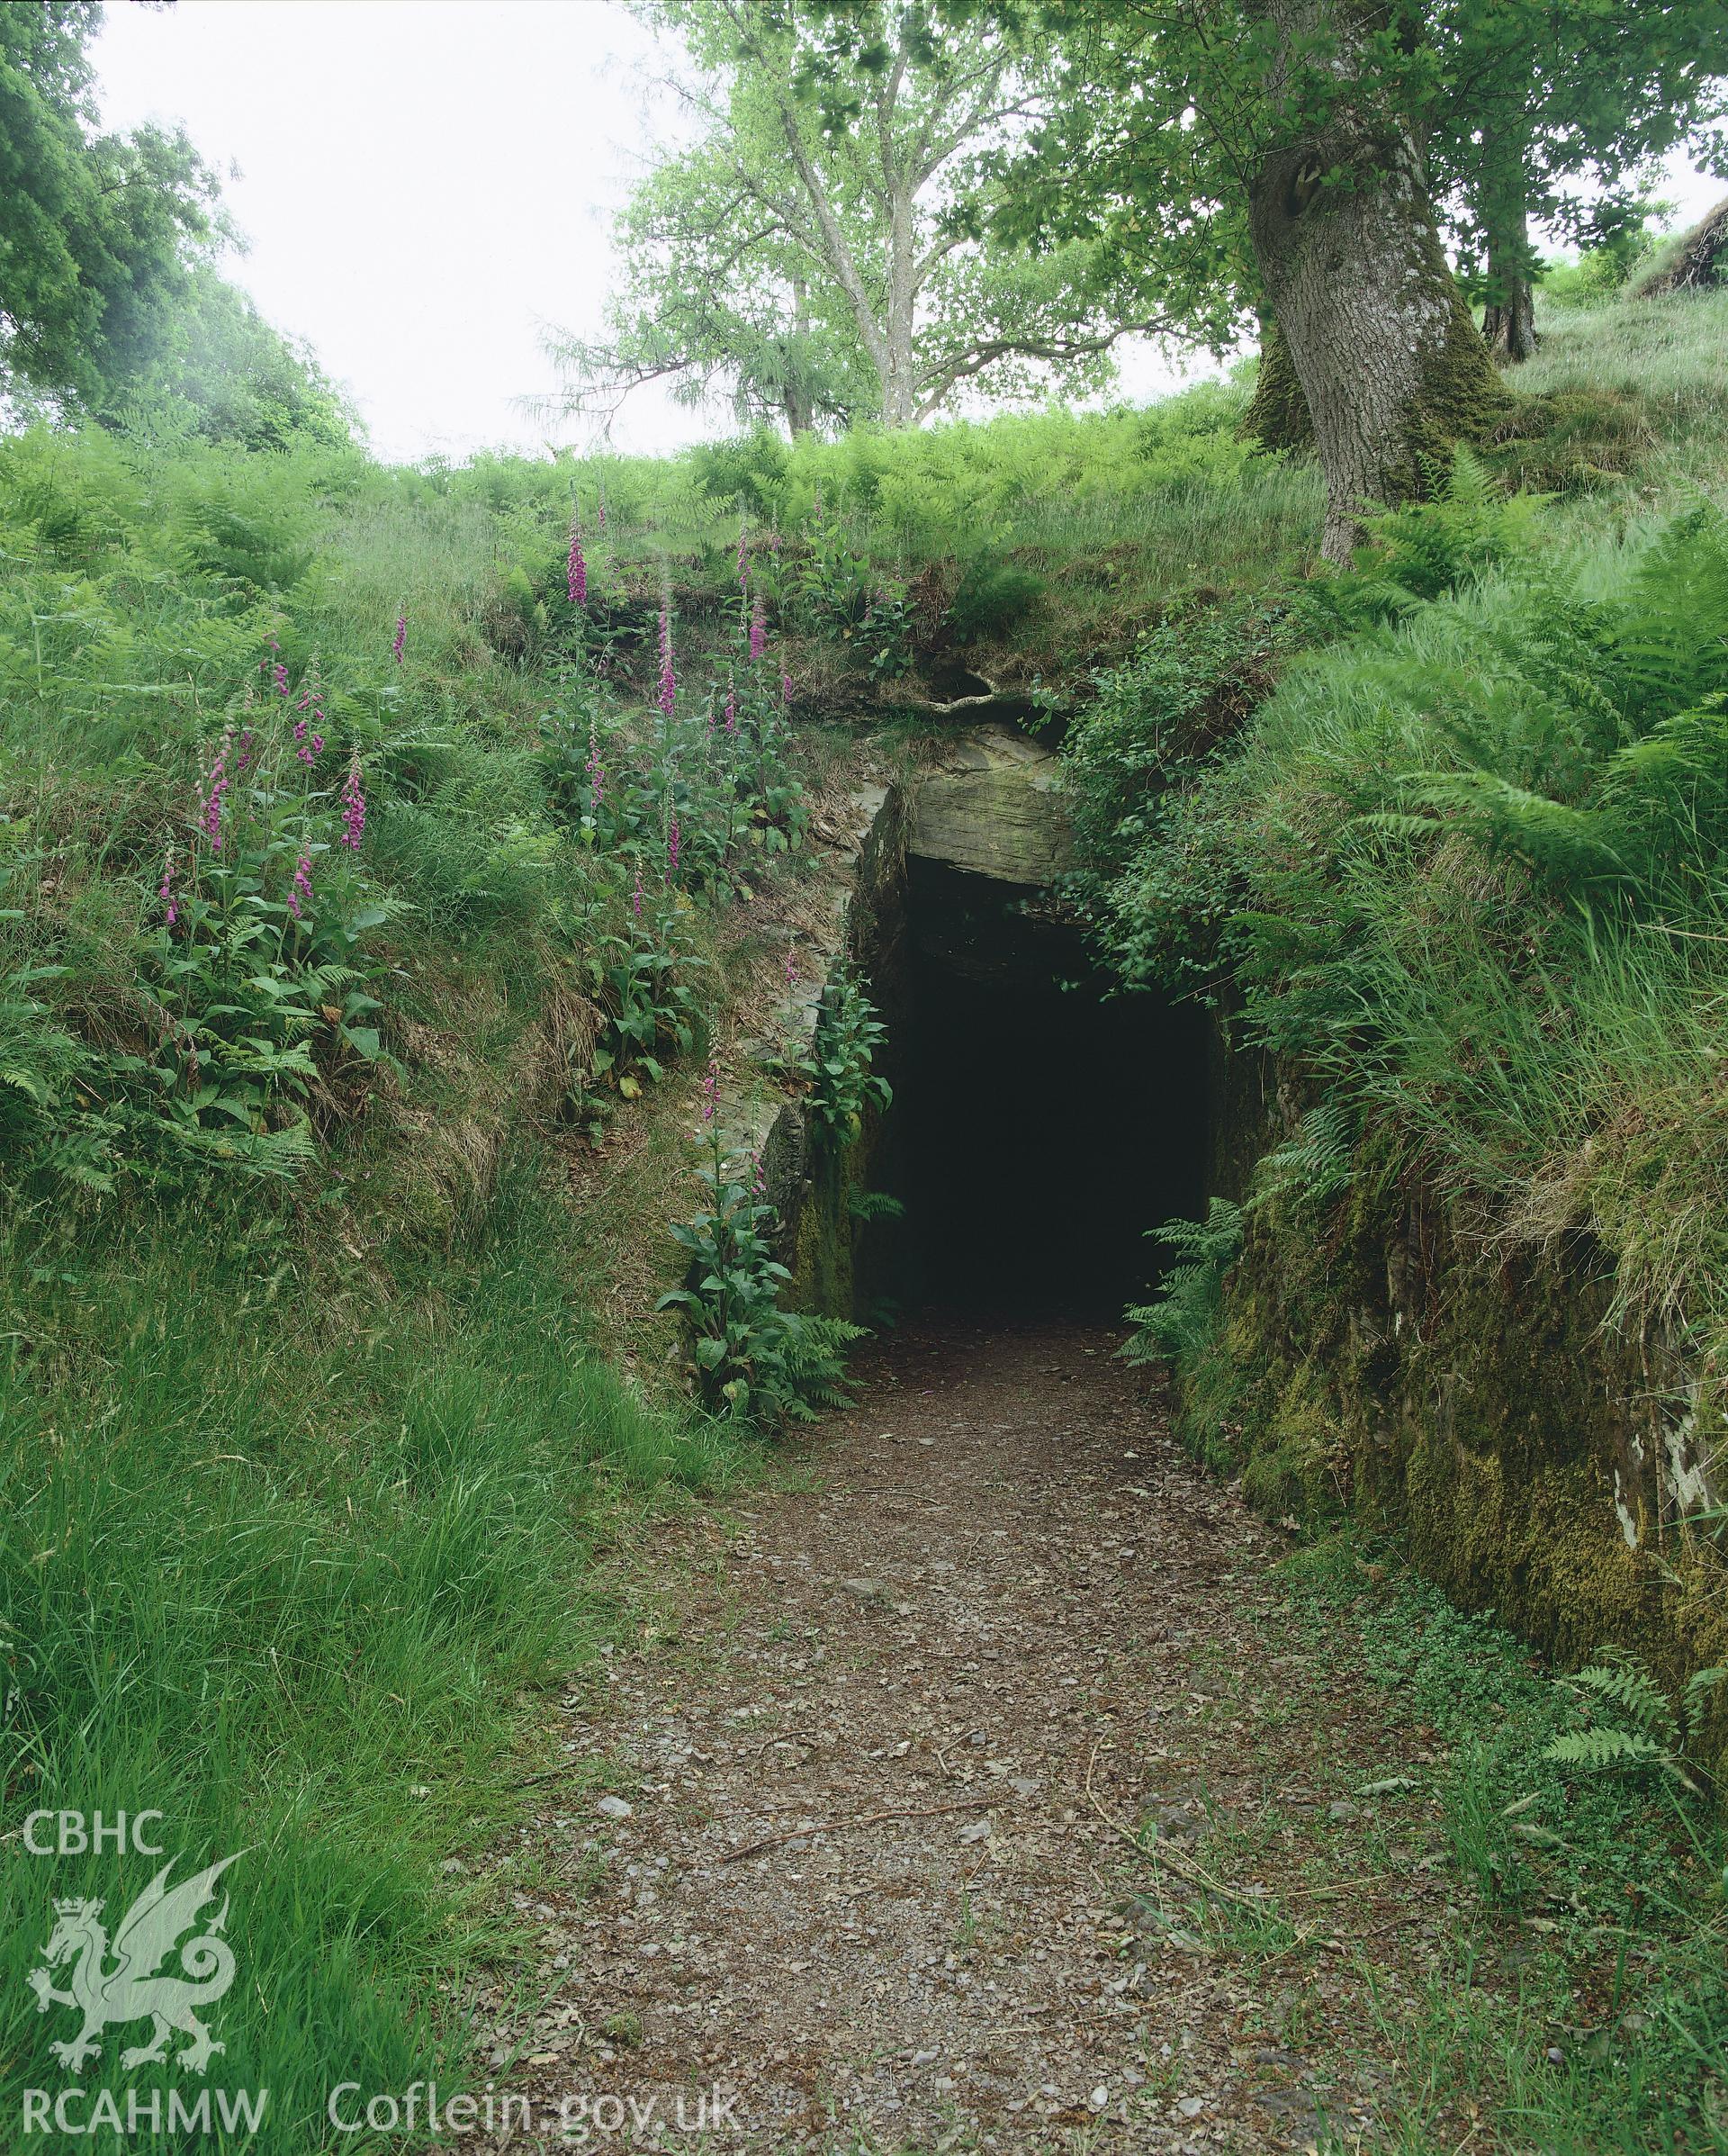 RCAHMW colour transparency showing the entrance to Dolaucothi Goldmine.